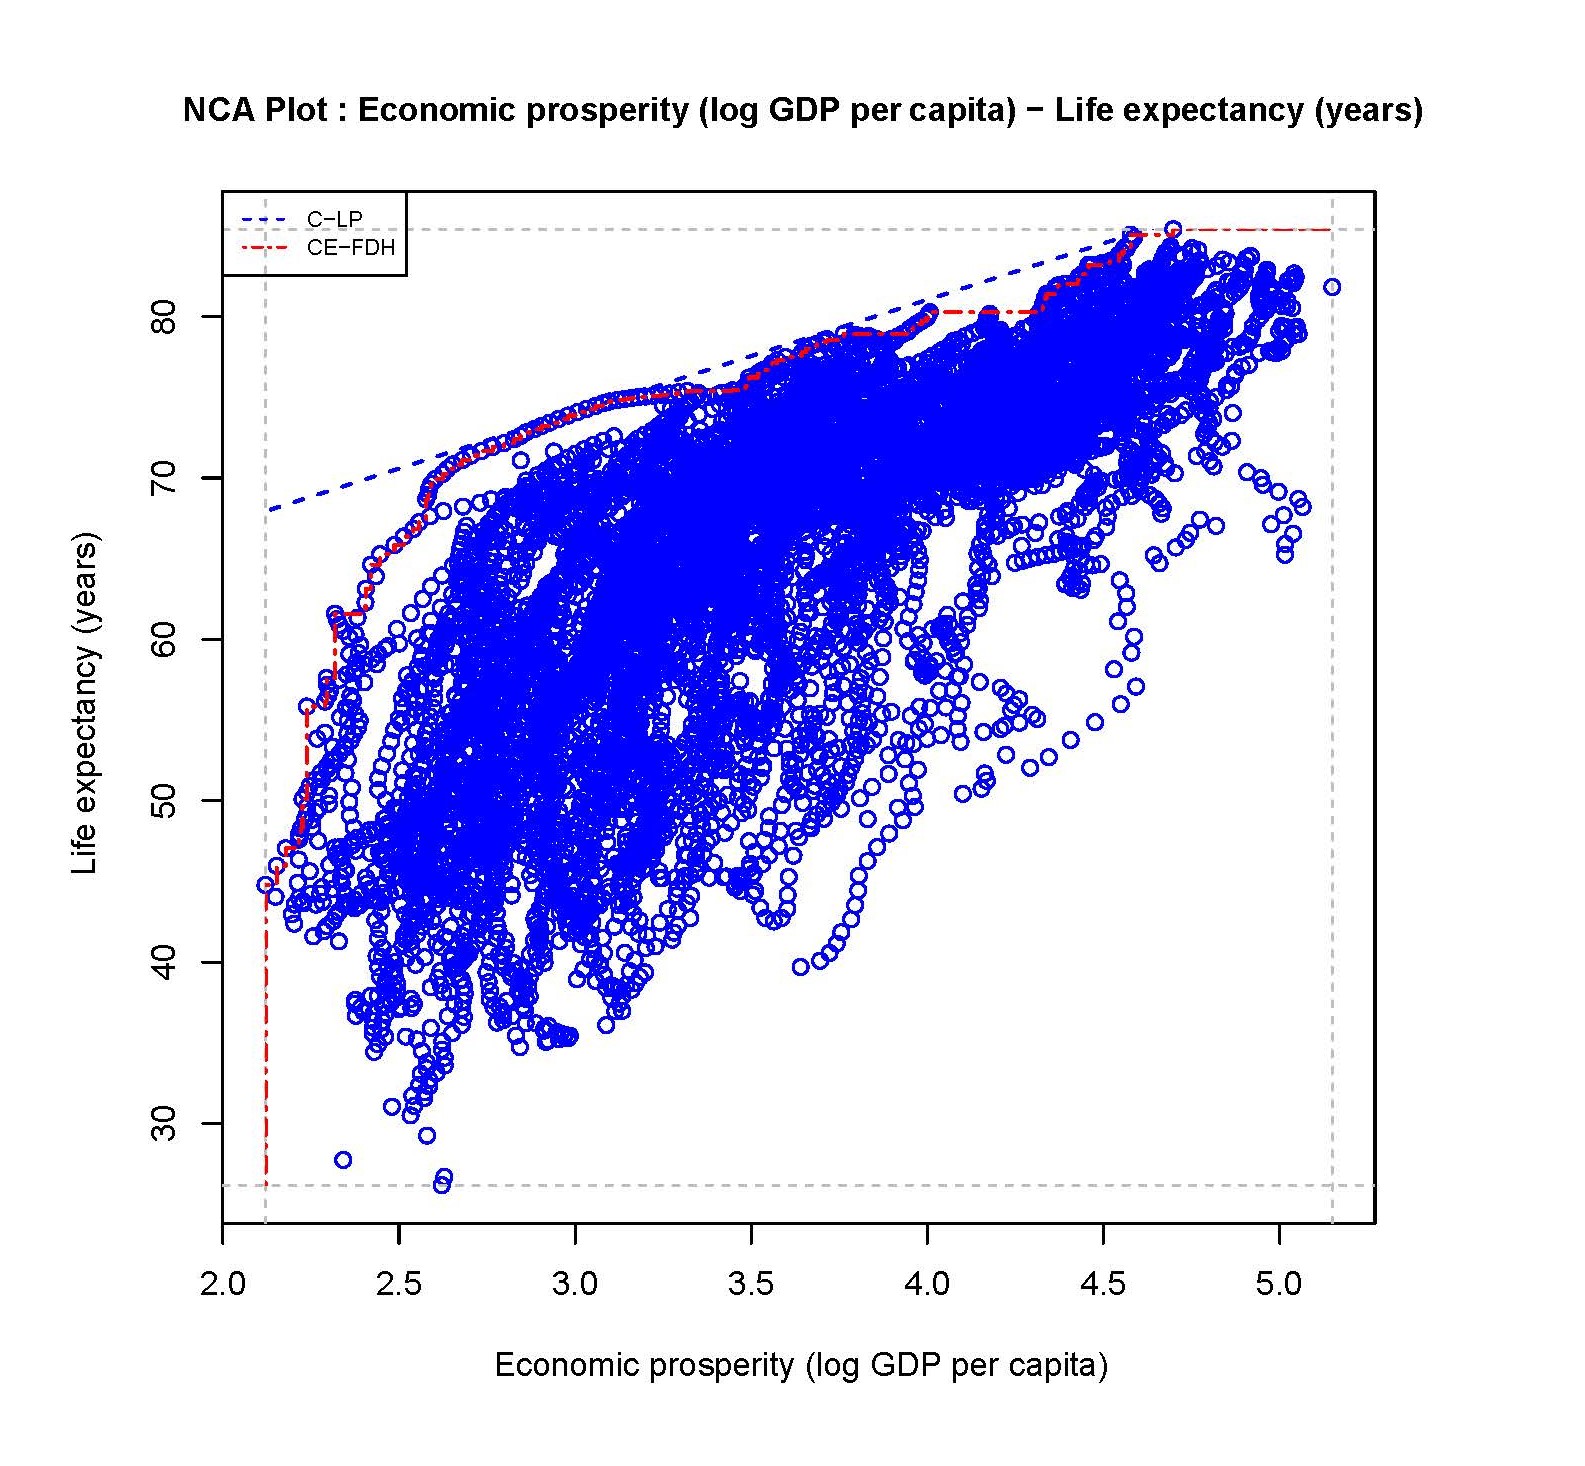 Scatter plot of Economic prosperity and Life expectancey with two ceiling lines (Pooled Worldbank data from 1960 to 2019 for all countries/years).